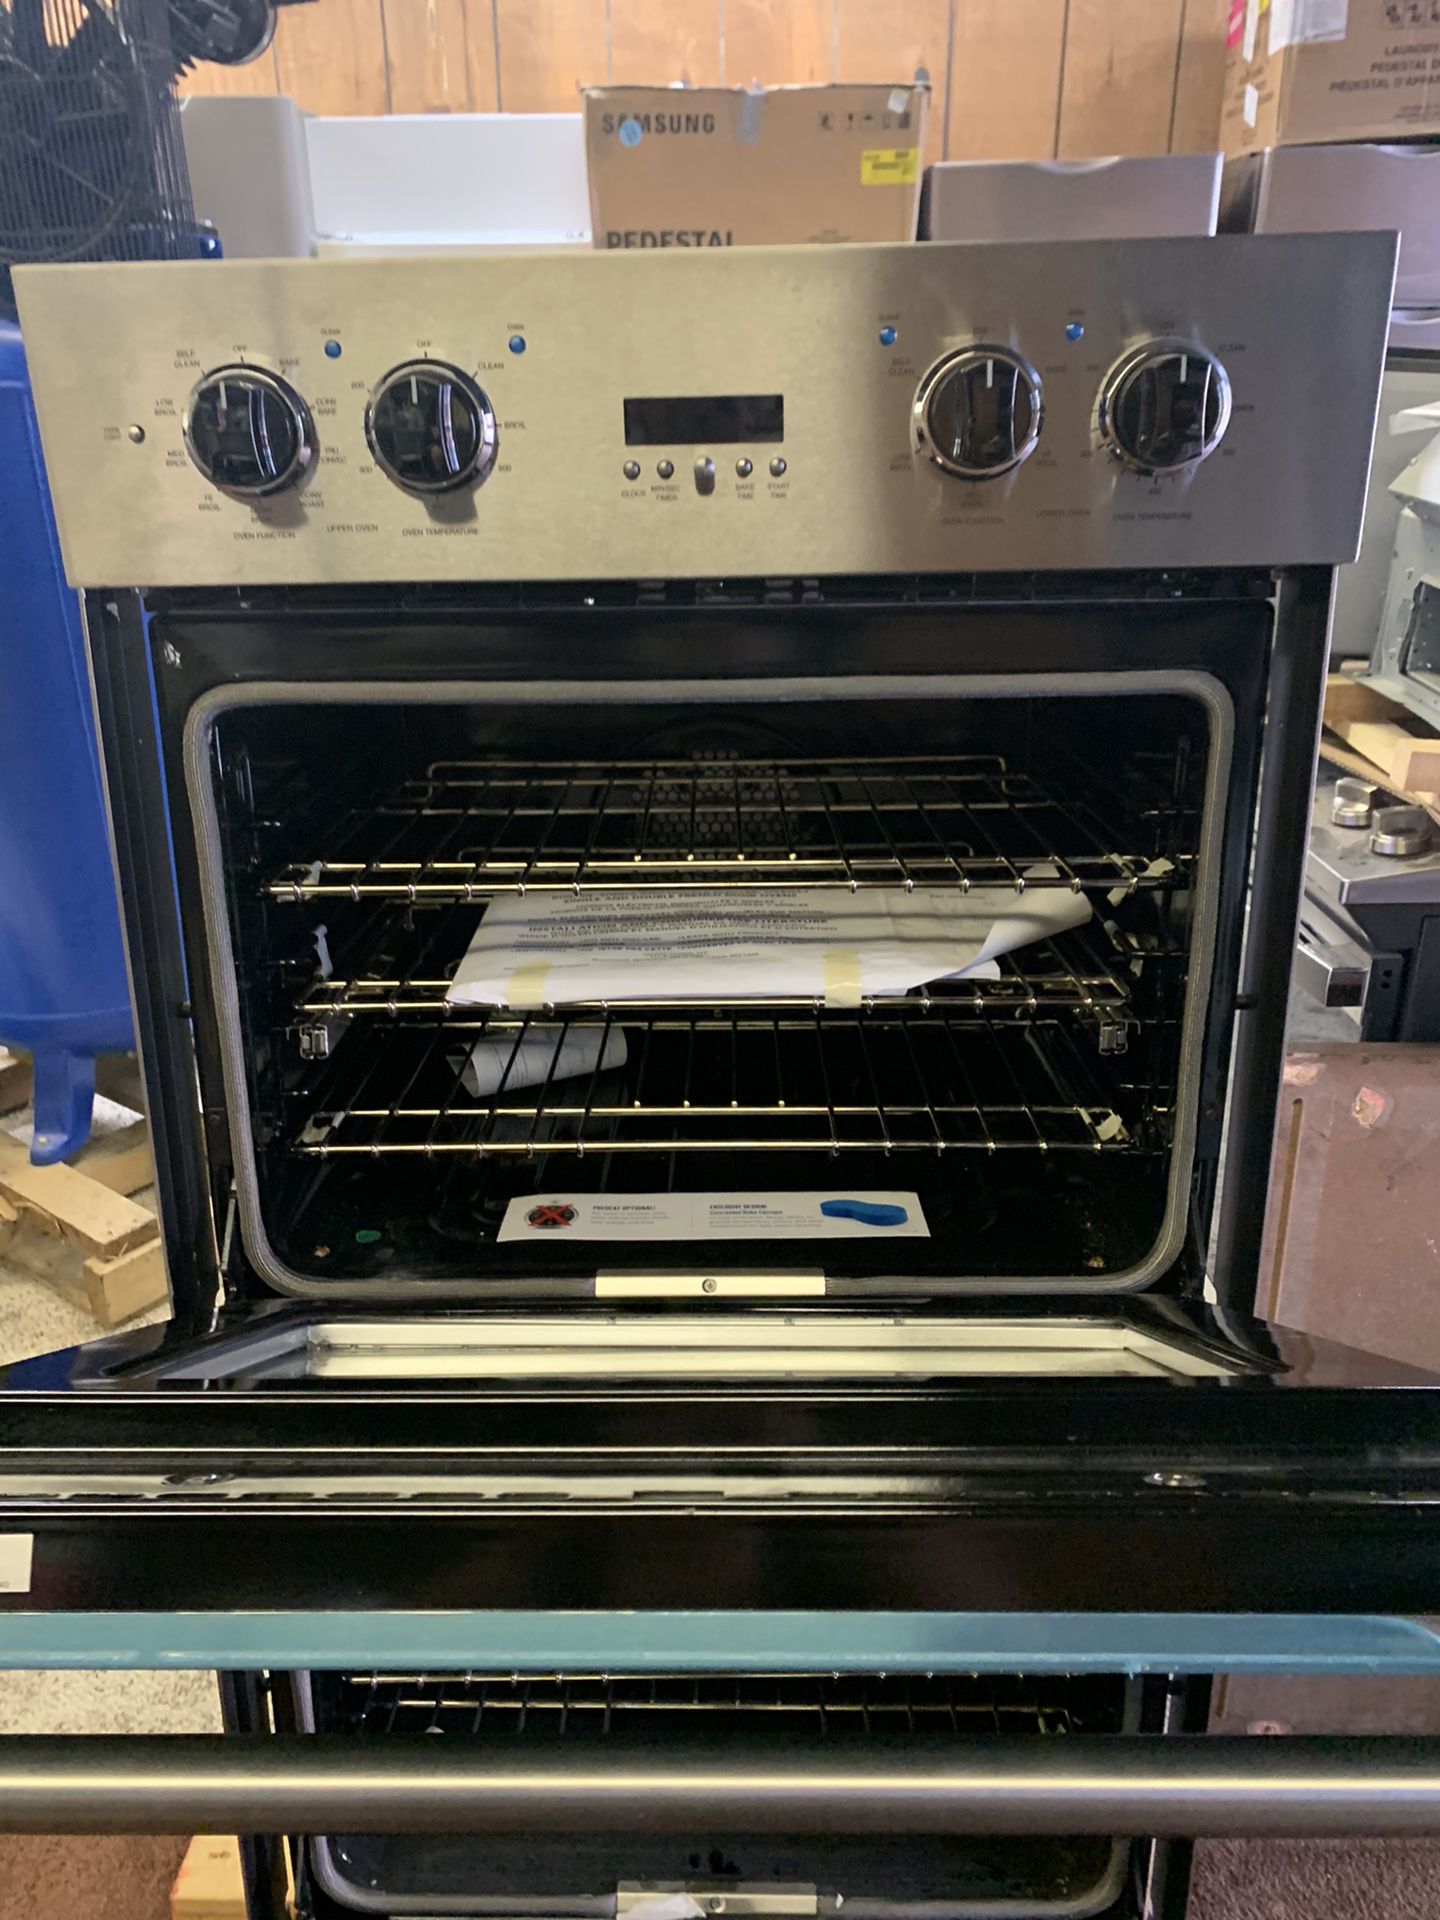 VIKING 5 SERIES 30” DOUBLE WALL OVEN